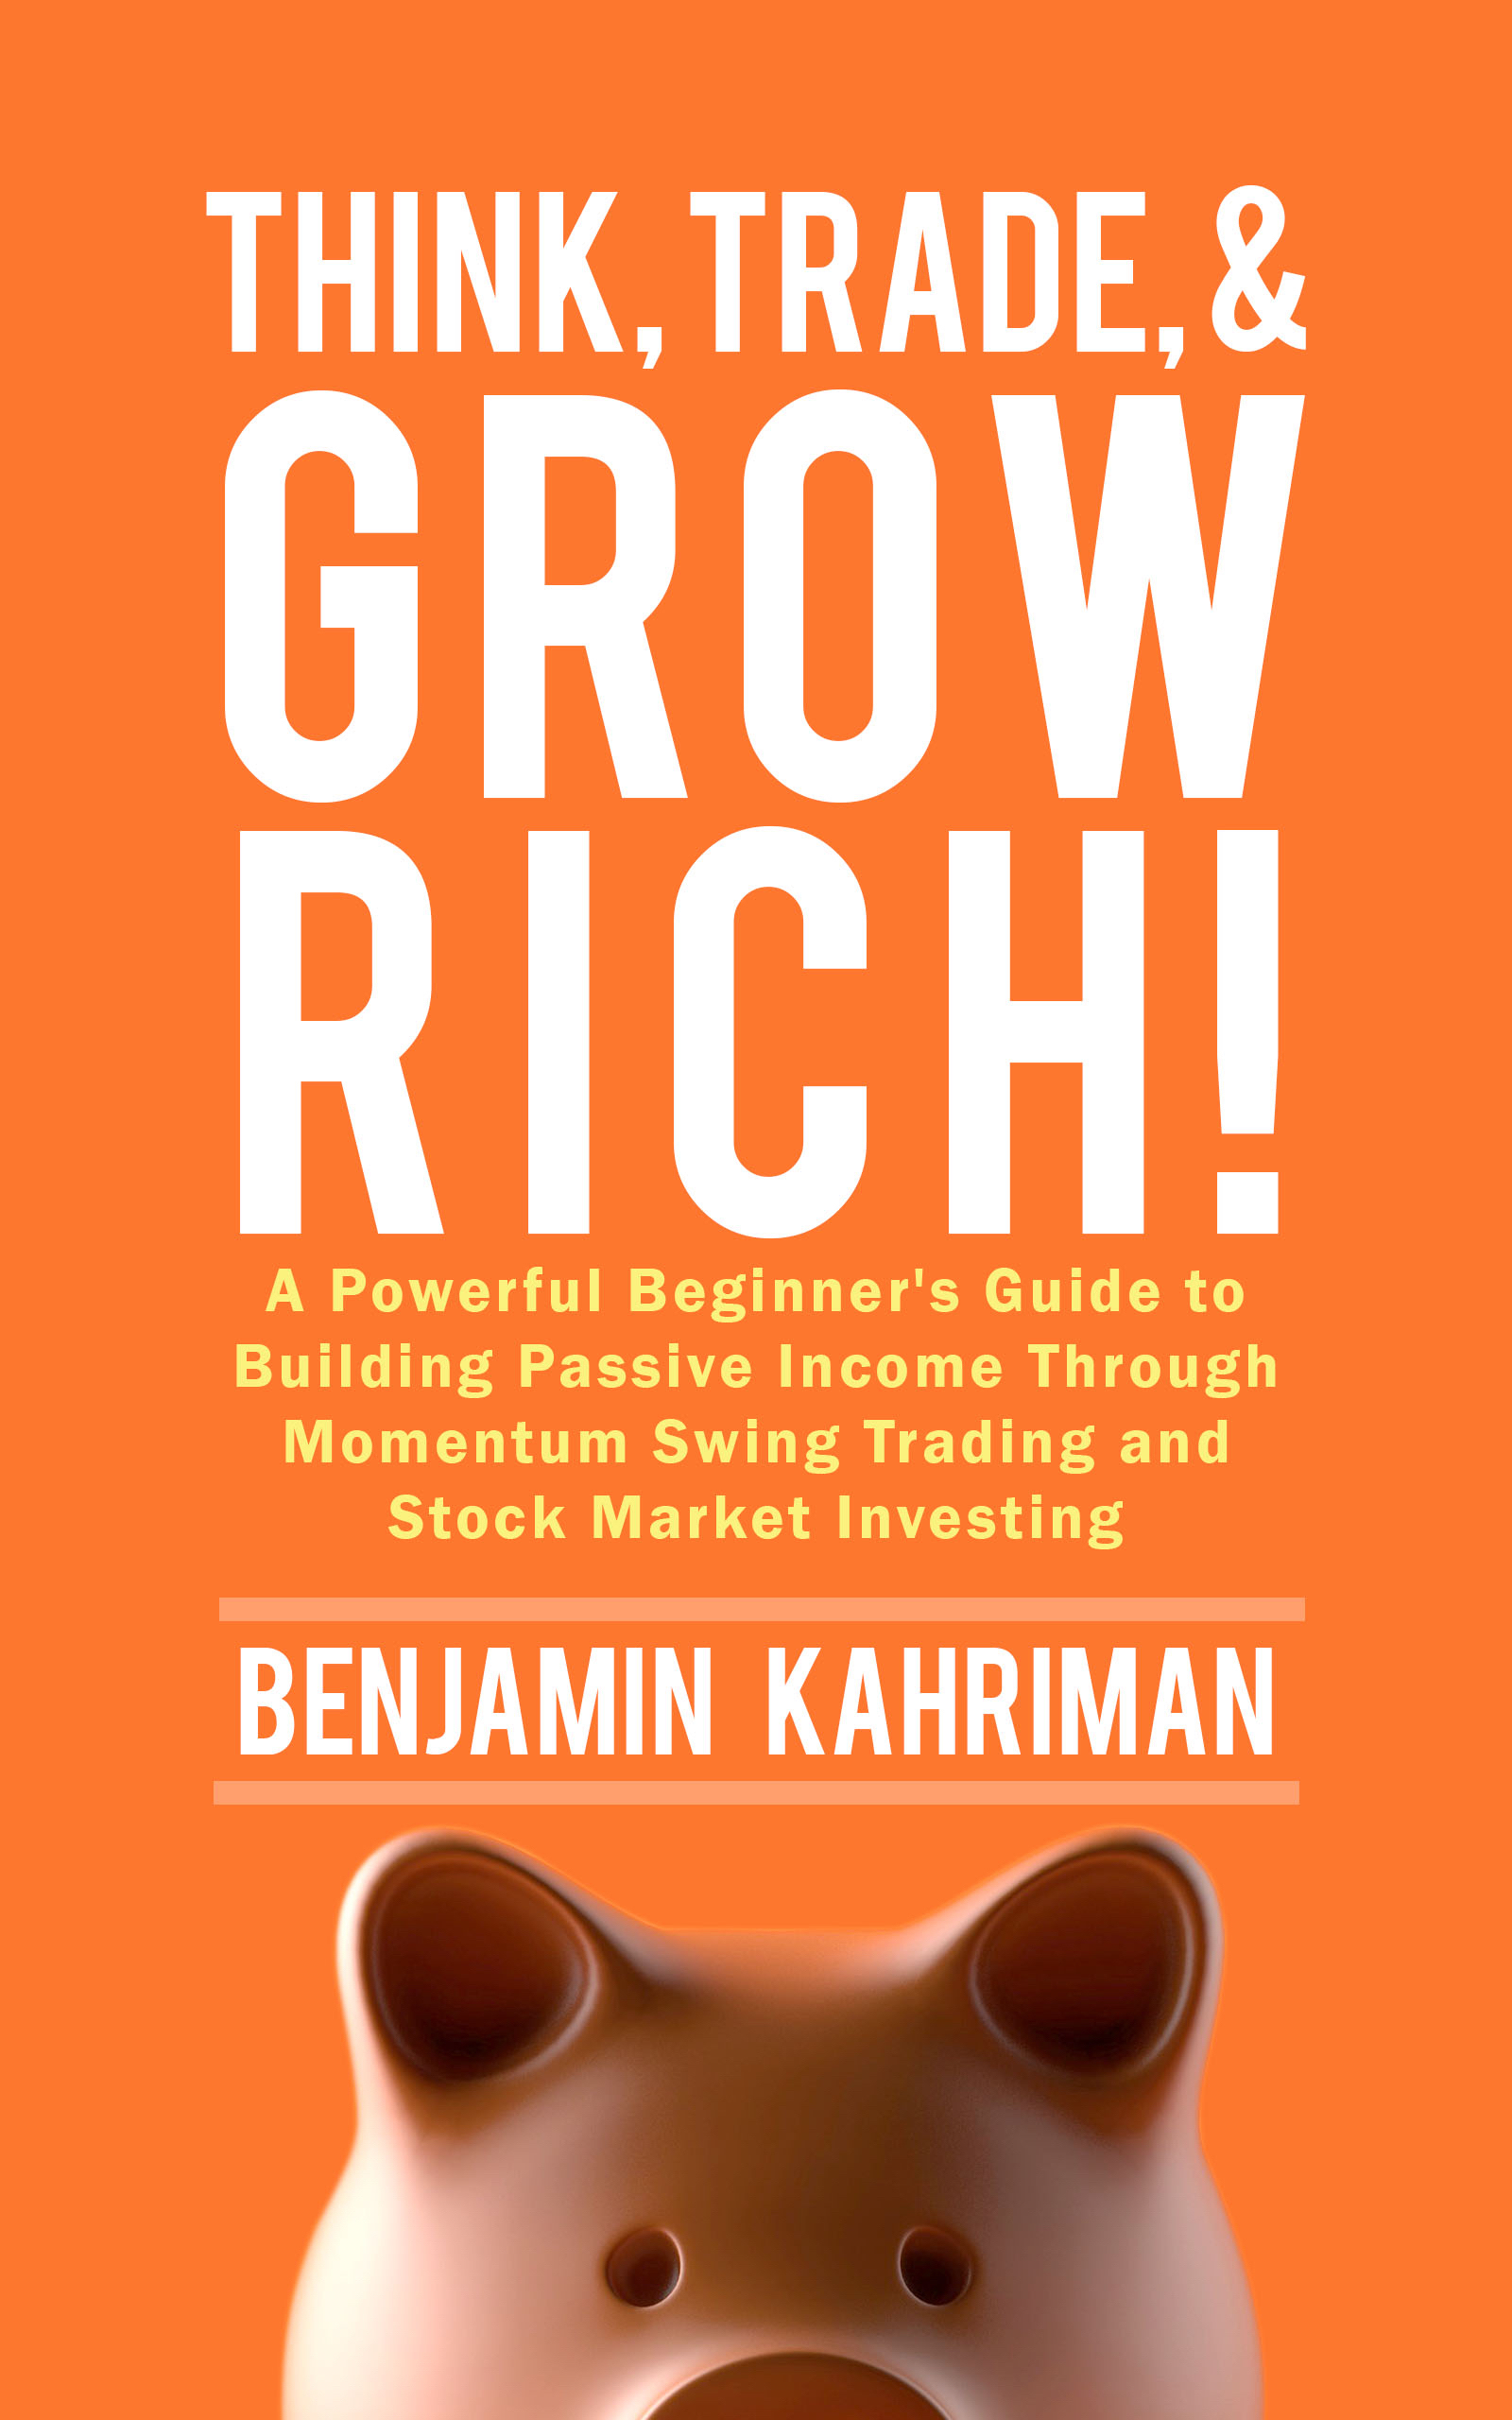 FREE: Think, Trade, and Grow Rich!: A Powerful Beginner’s Guide to Building Passive Income Through Momentum Swing Trading and Stock Market Investing by Benjamin Kahriman